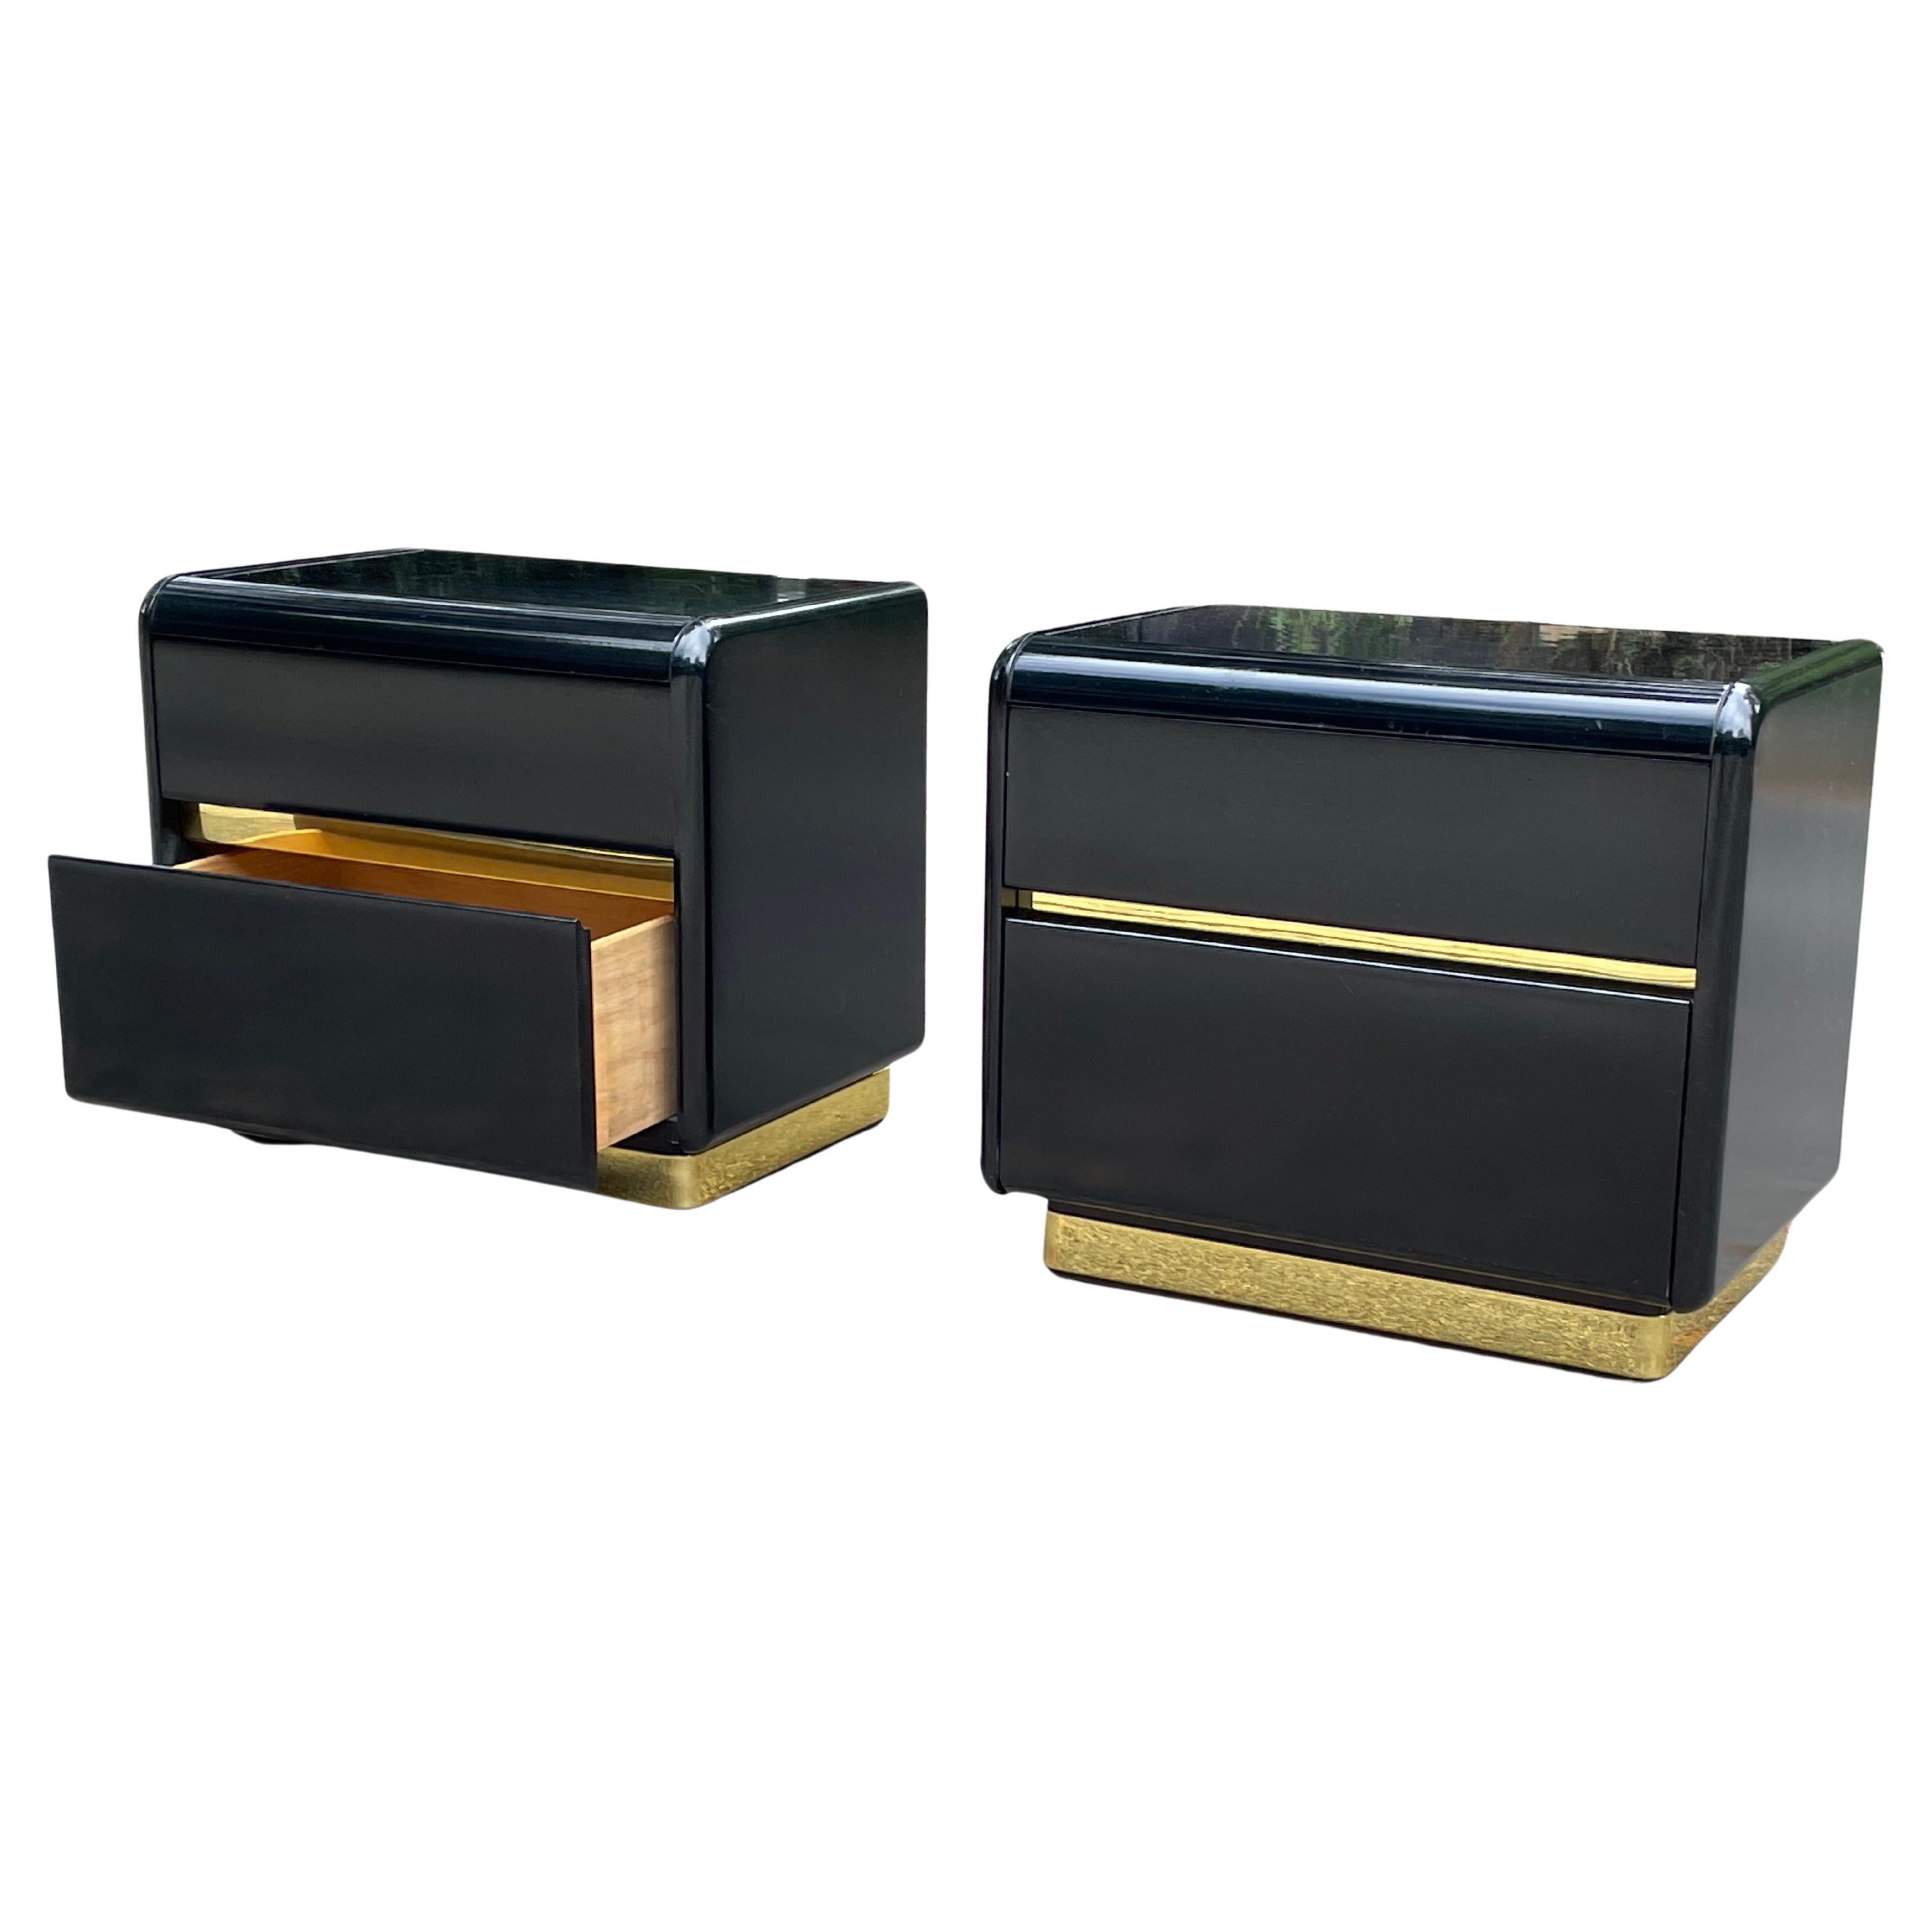 American Post-Modern Pair of Black and Brass Lacquer 1980s Nightstands